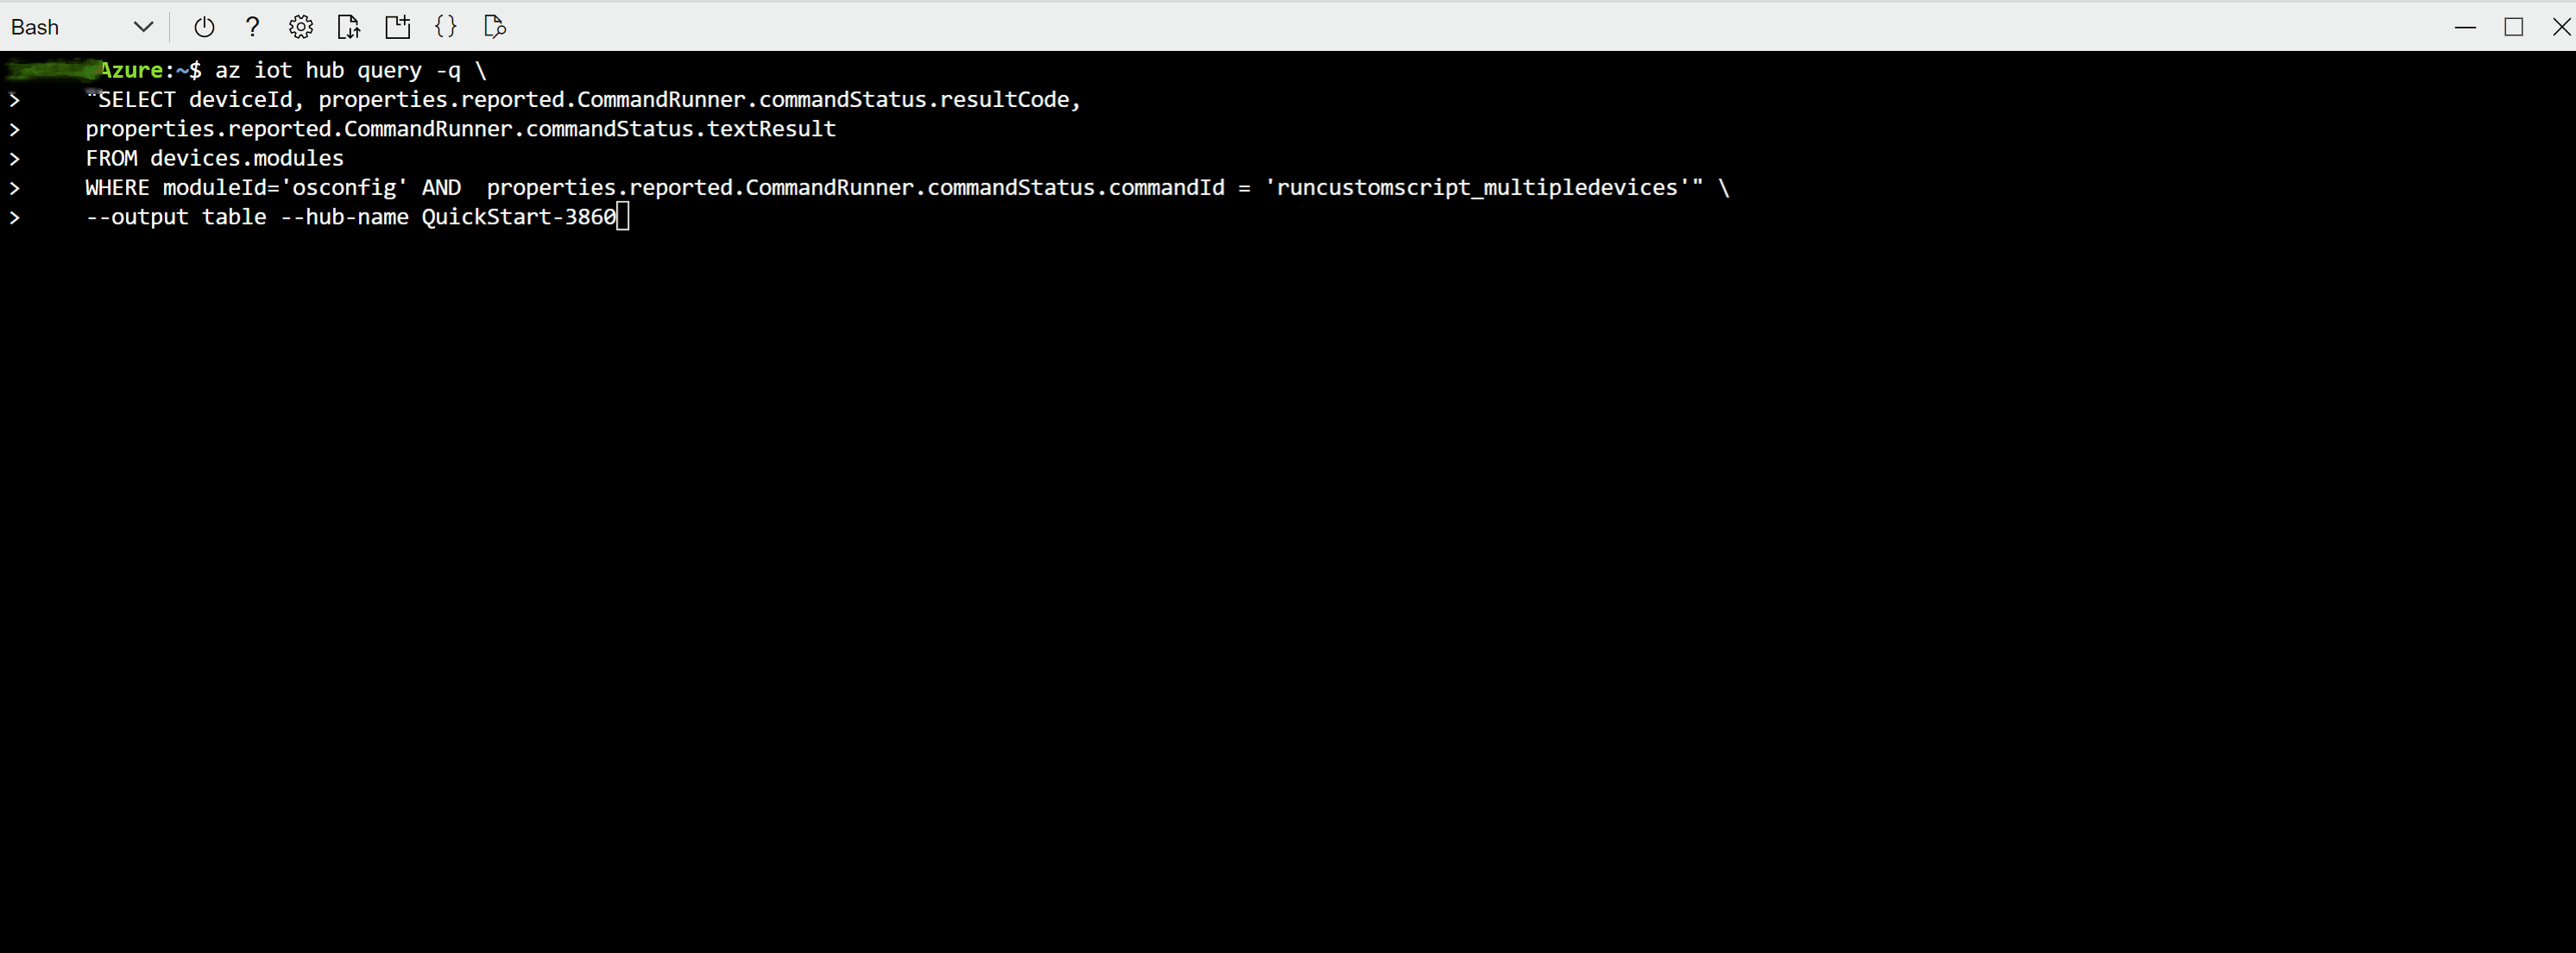 Screen capture that shows how to verify after running a custom script on a fleet of devices using bash